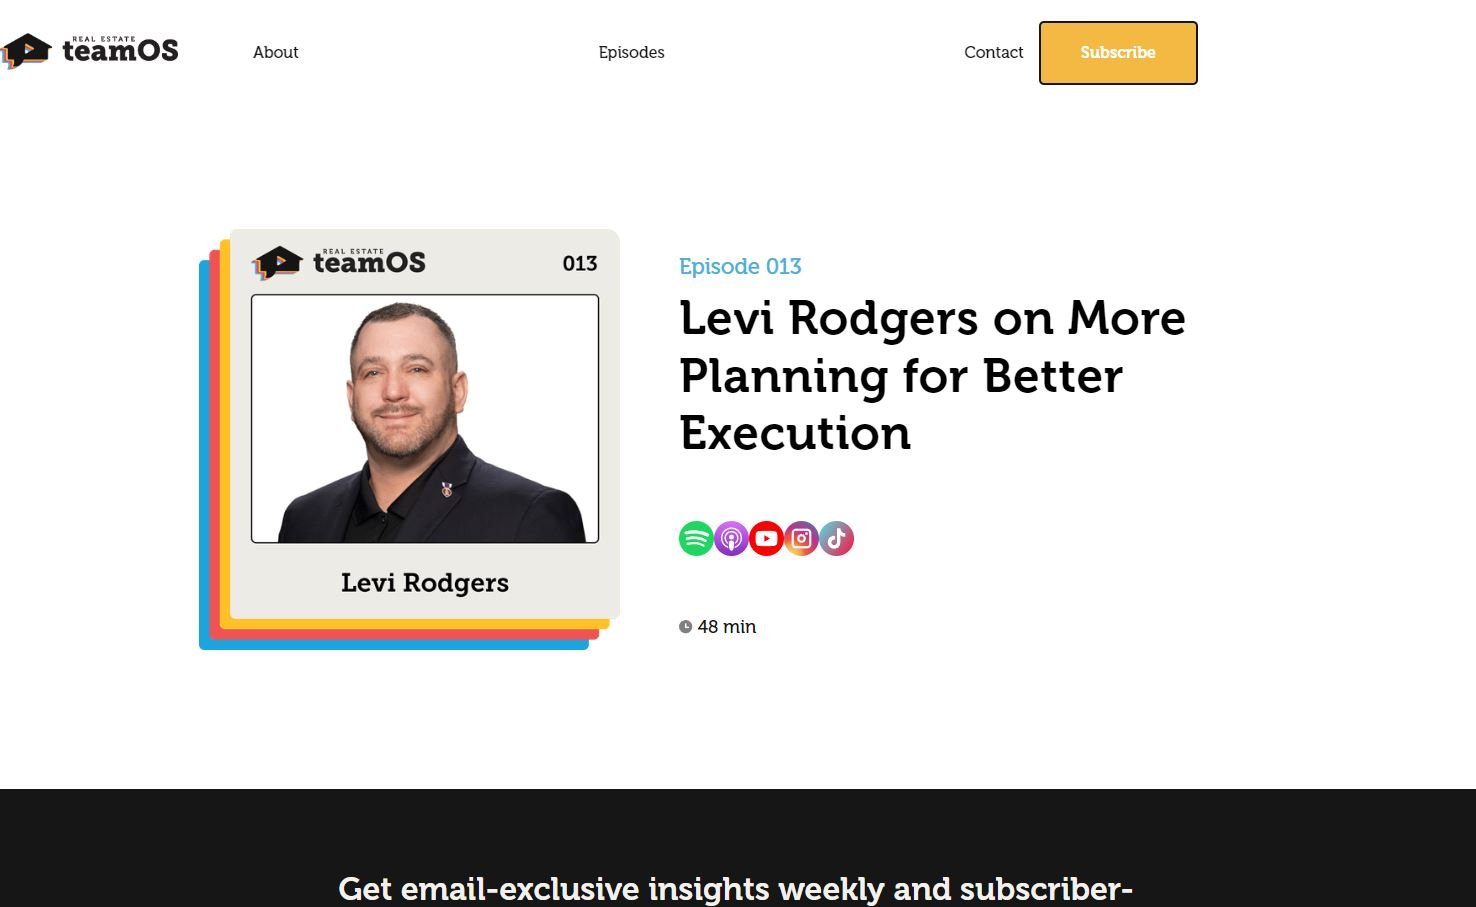 Levi Rodgers on More Planning for Better Execution